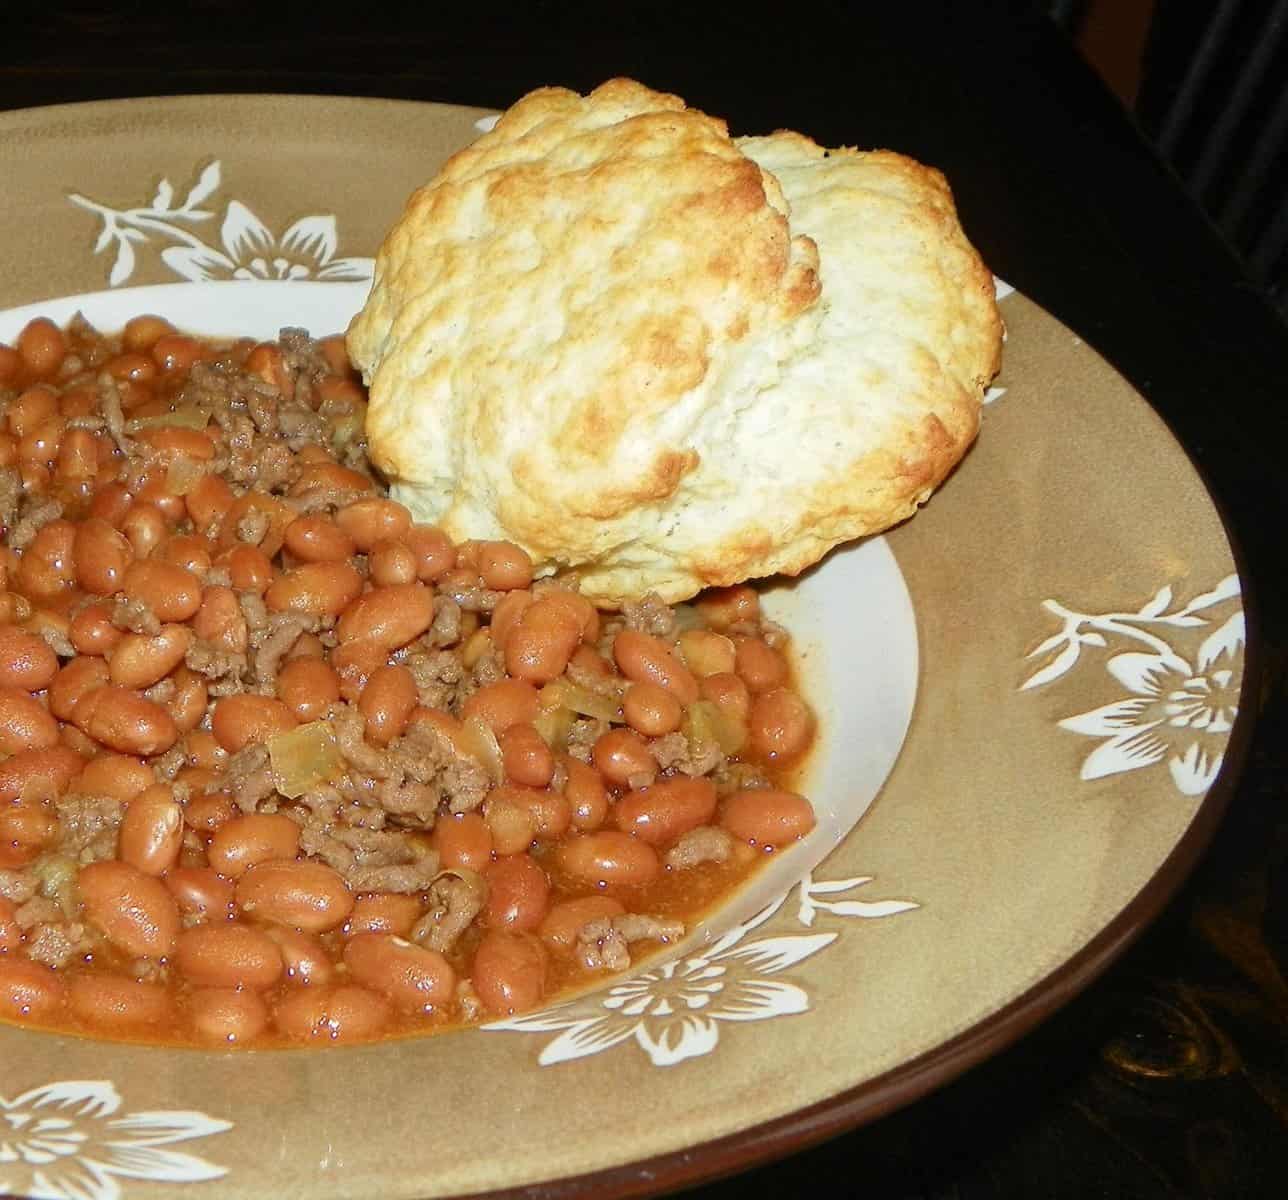 Beans and Burger (Hillbilly Chili)